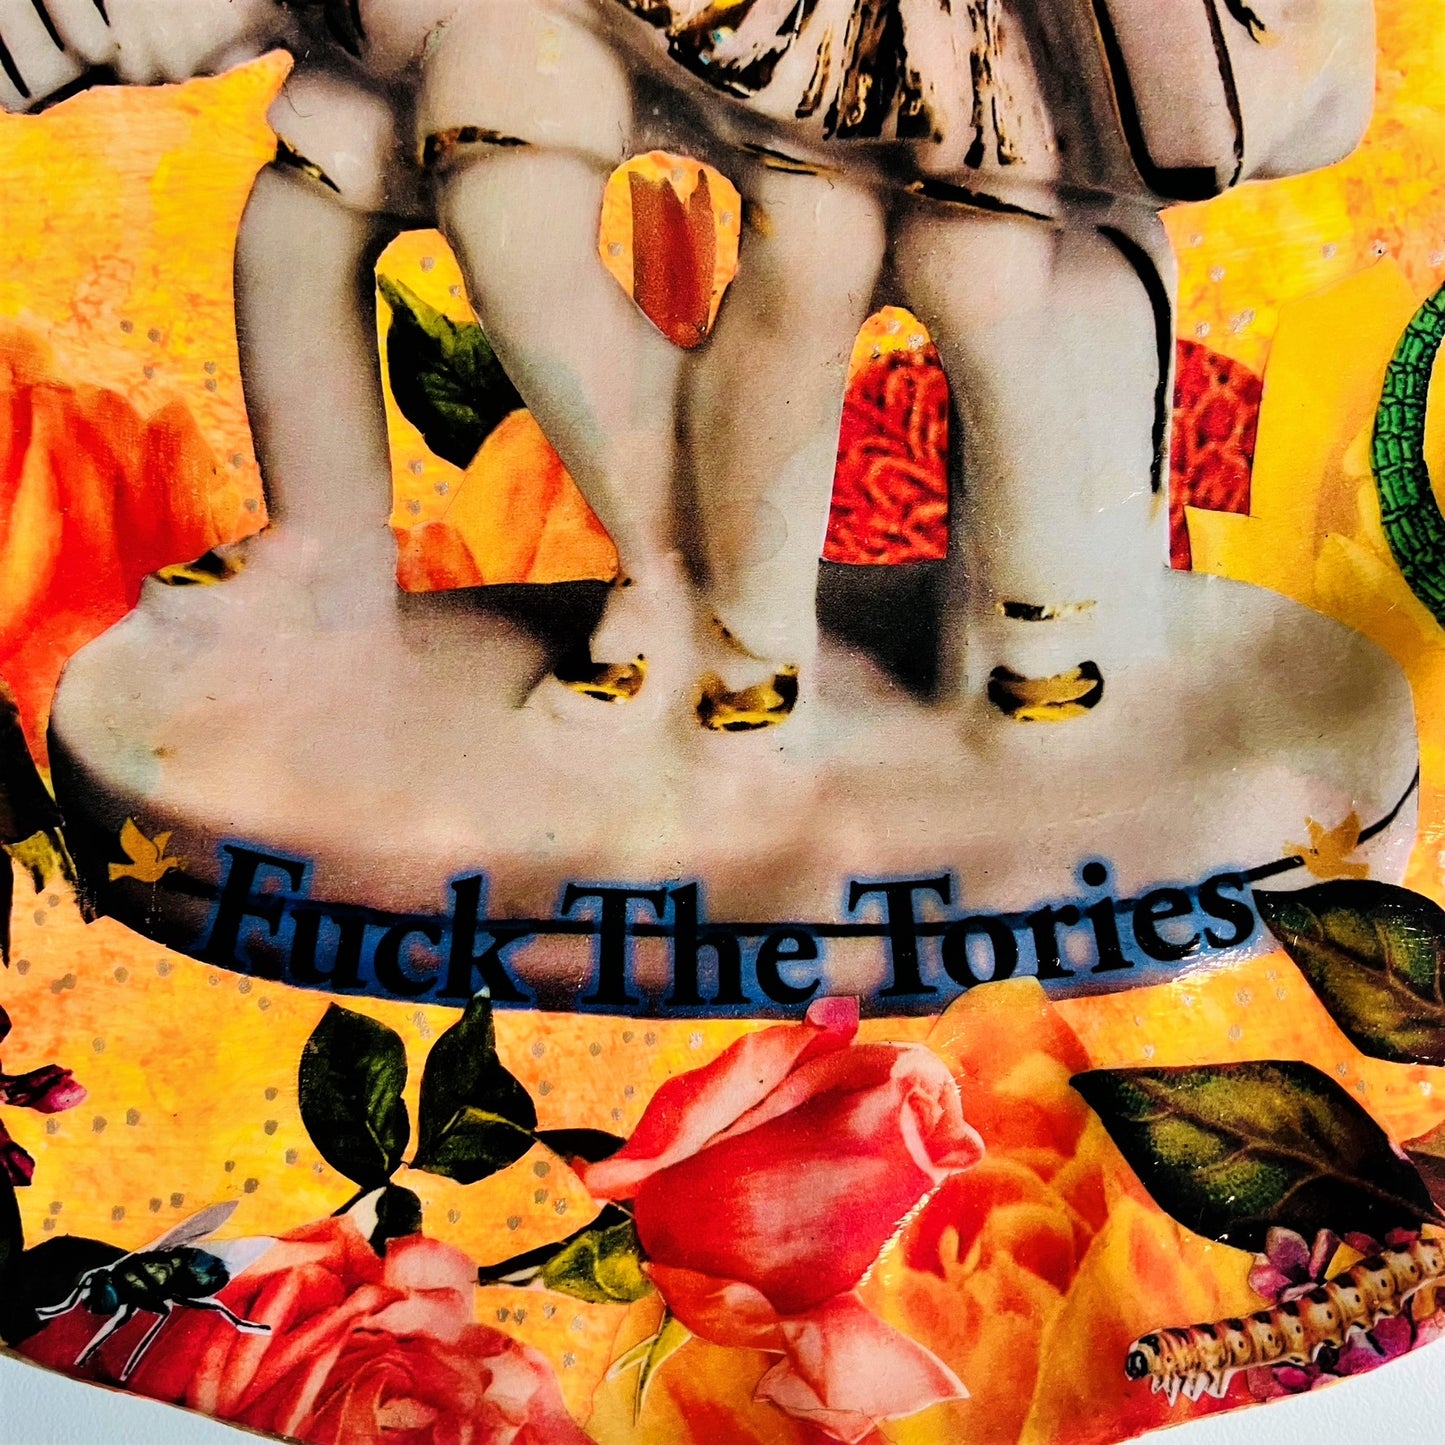 Orange Upcycled Wall Plate - "More Arts. Fuck The Tories" - by House of Frisson